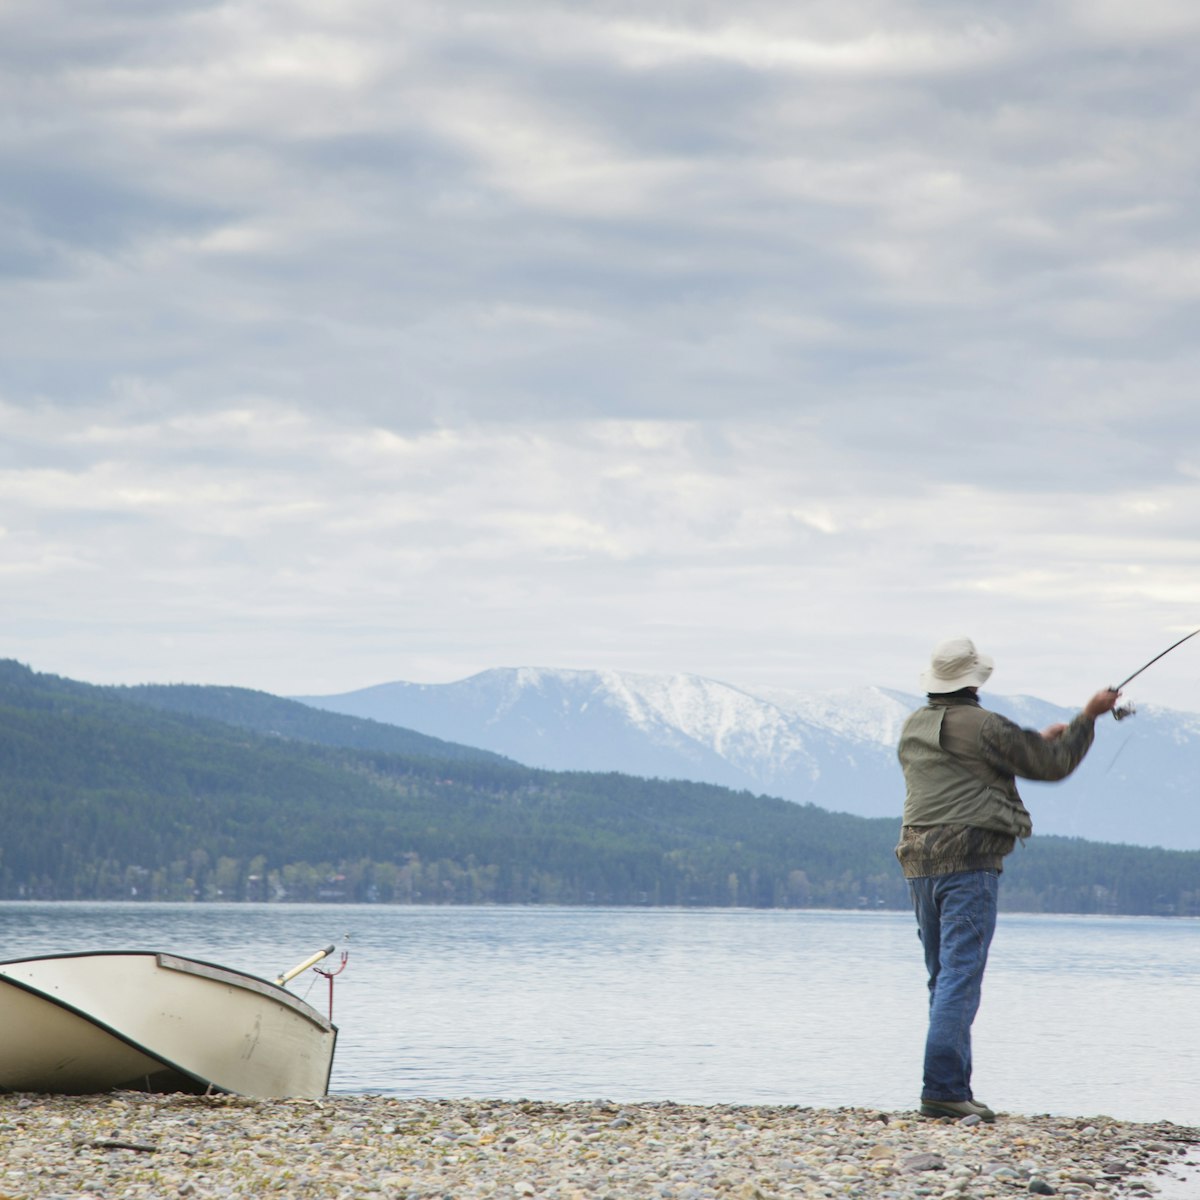 538589233
30-34 Years, beach, concentration, day, fisherman, Fishing Boat, Fishing Rod, Full Length, Hobbies, Holding, Horizontal, Horizontal, lake, Mode Of Transport, Montana, One Mid Adult Man Only, One Person, outdoors, Preparation, Rear View, Skill, standing, USA, Whitefish, Whitefish lake